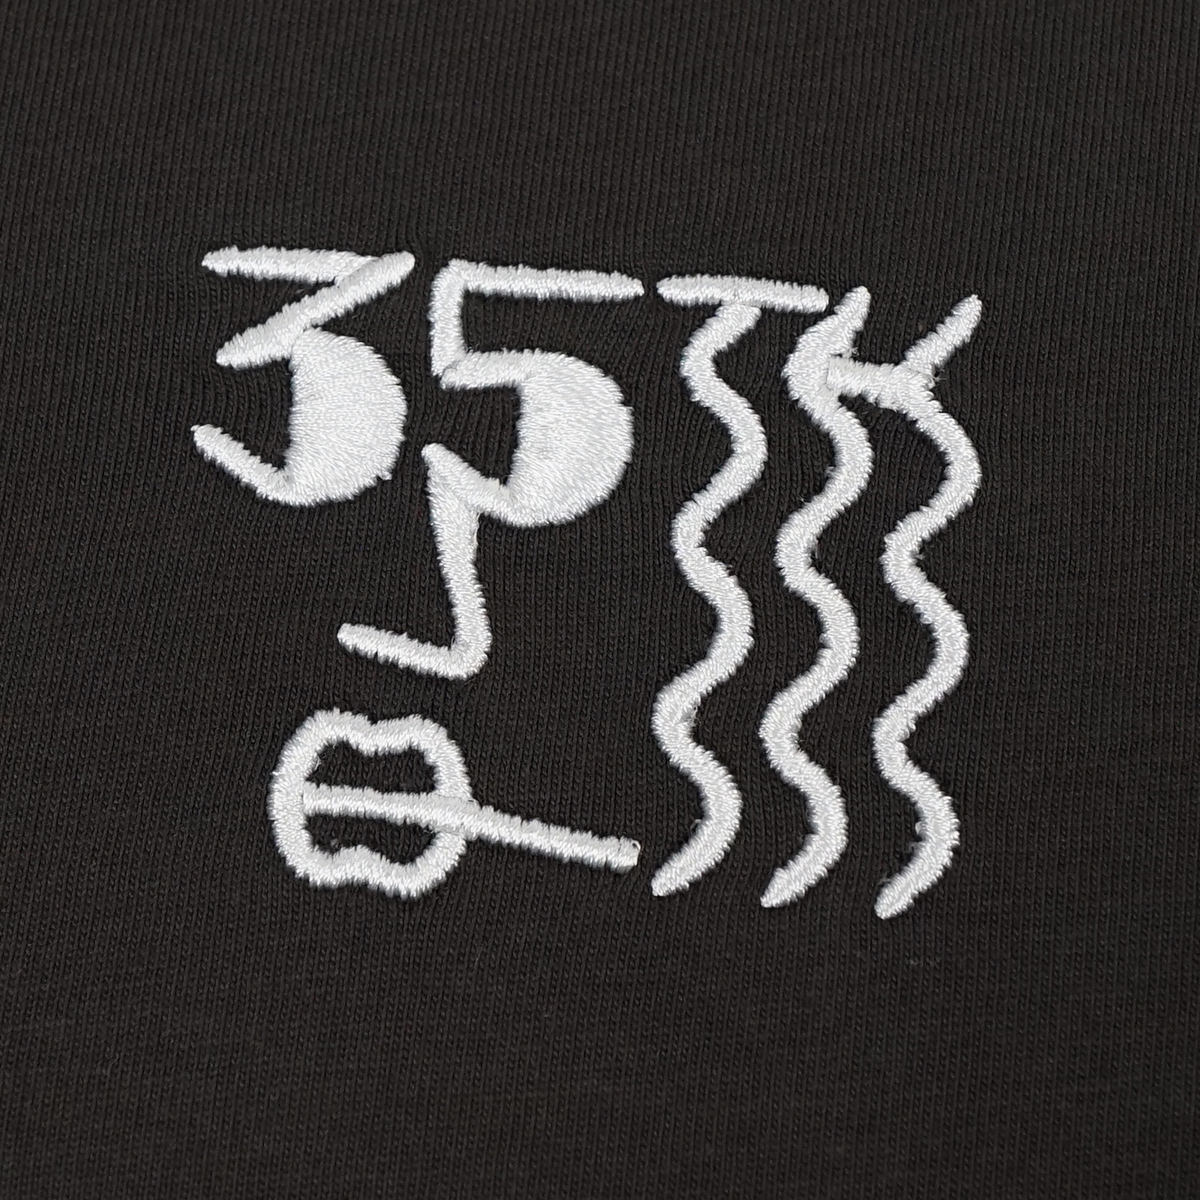 35th North 'Smoker' Embroidered T-Shirt - Coal